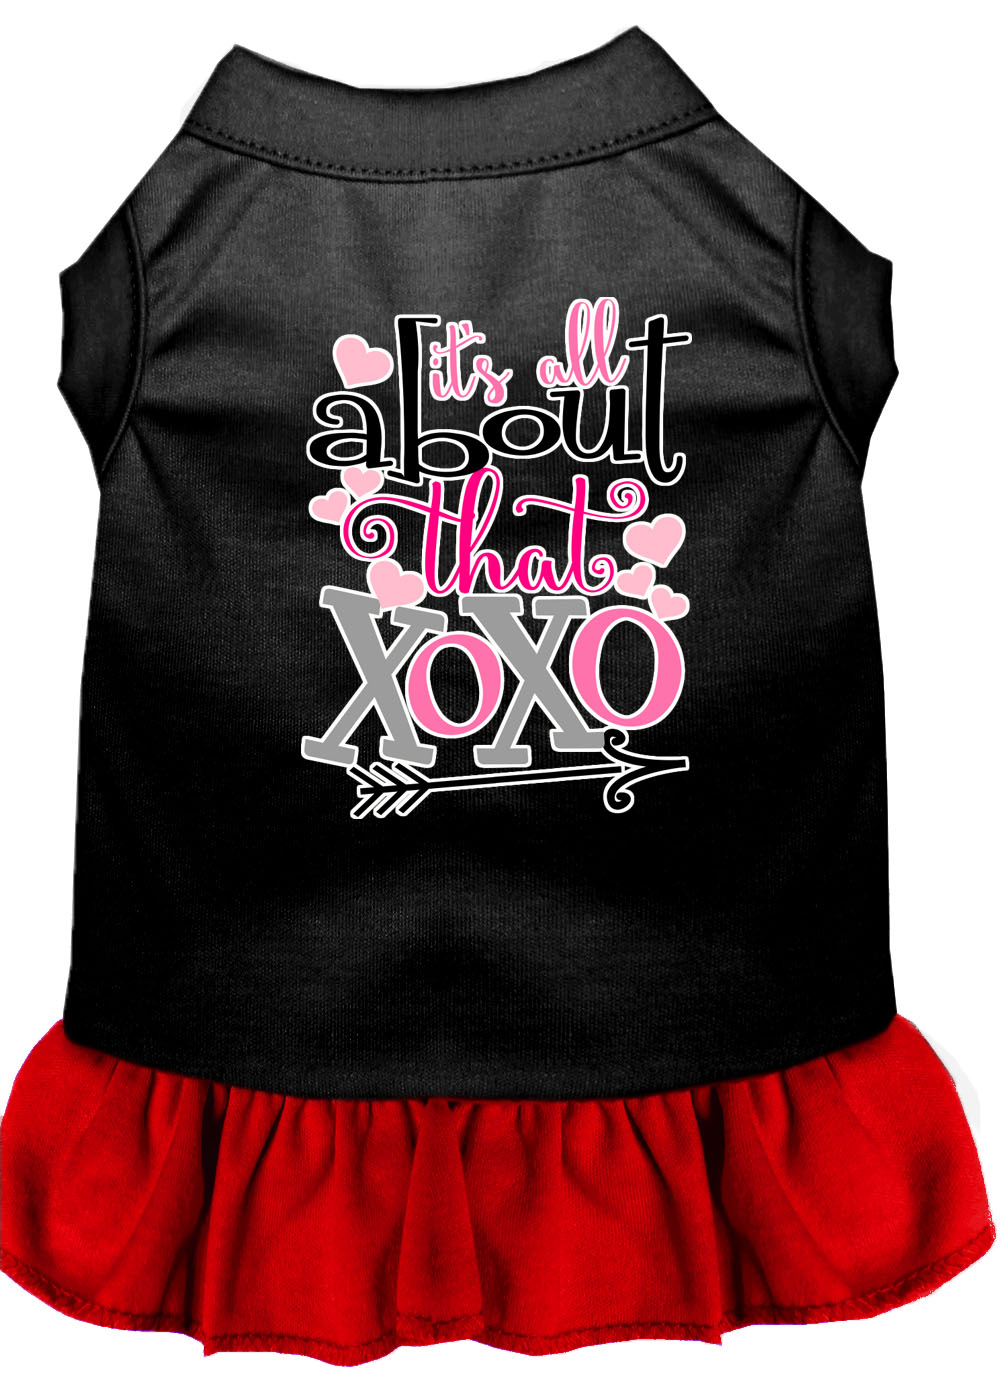 All about the XOXO Screen Print Dog Dress Black with Red Lg